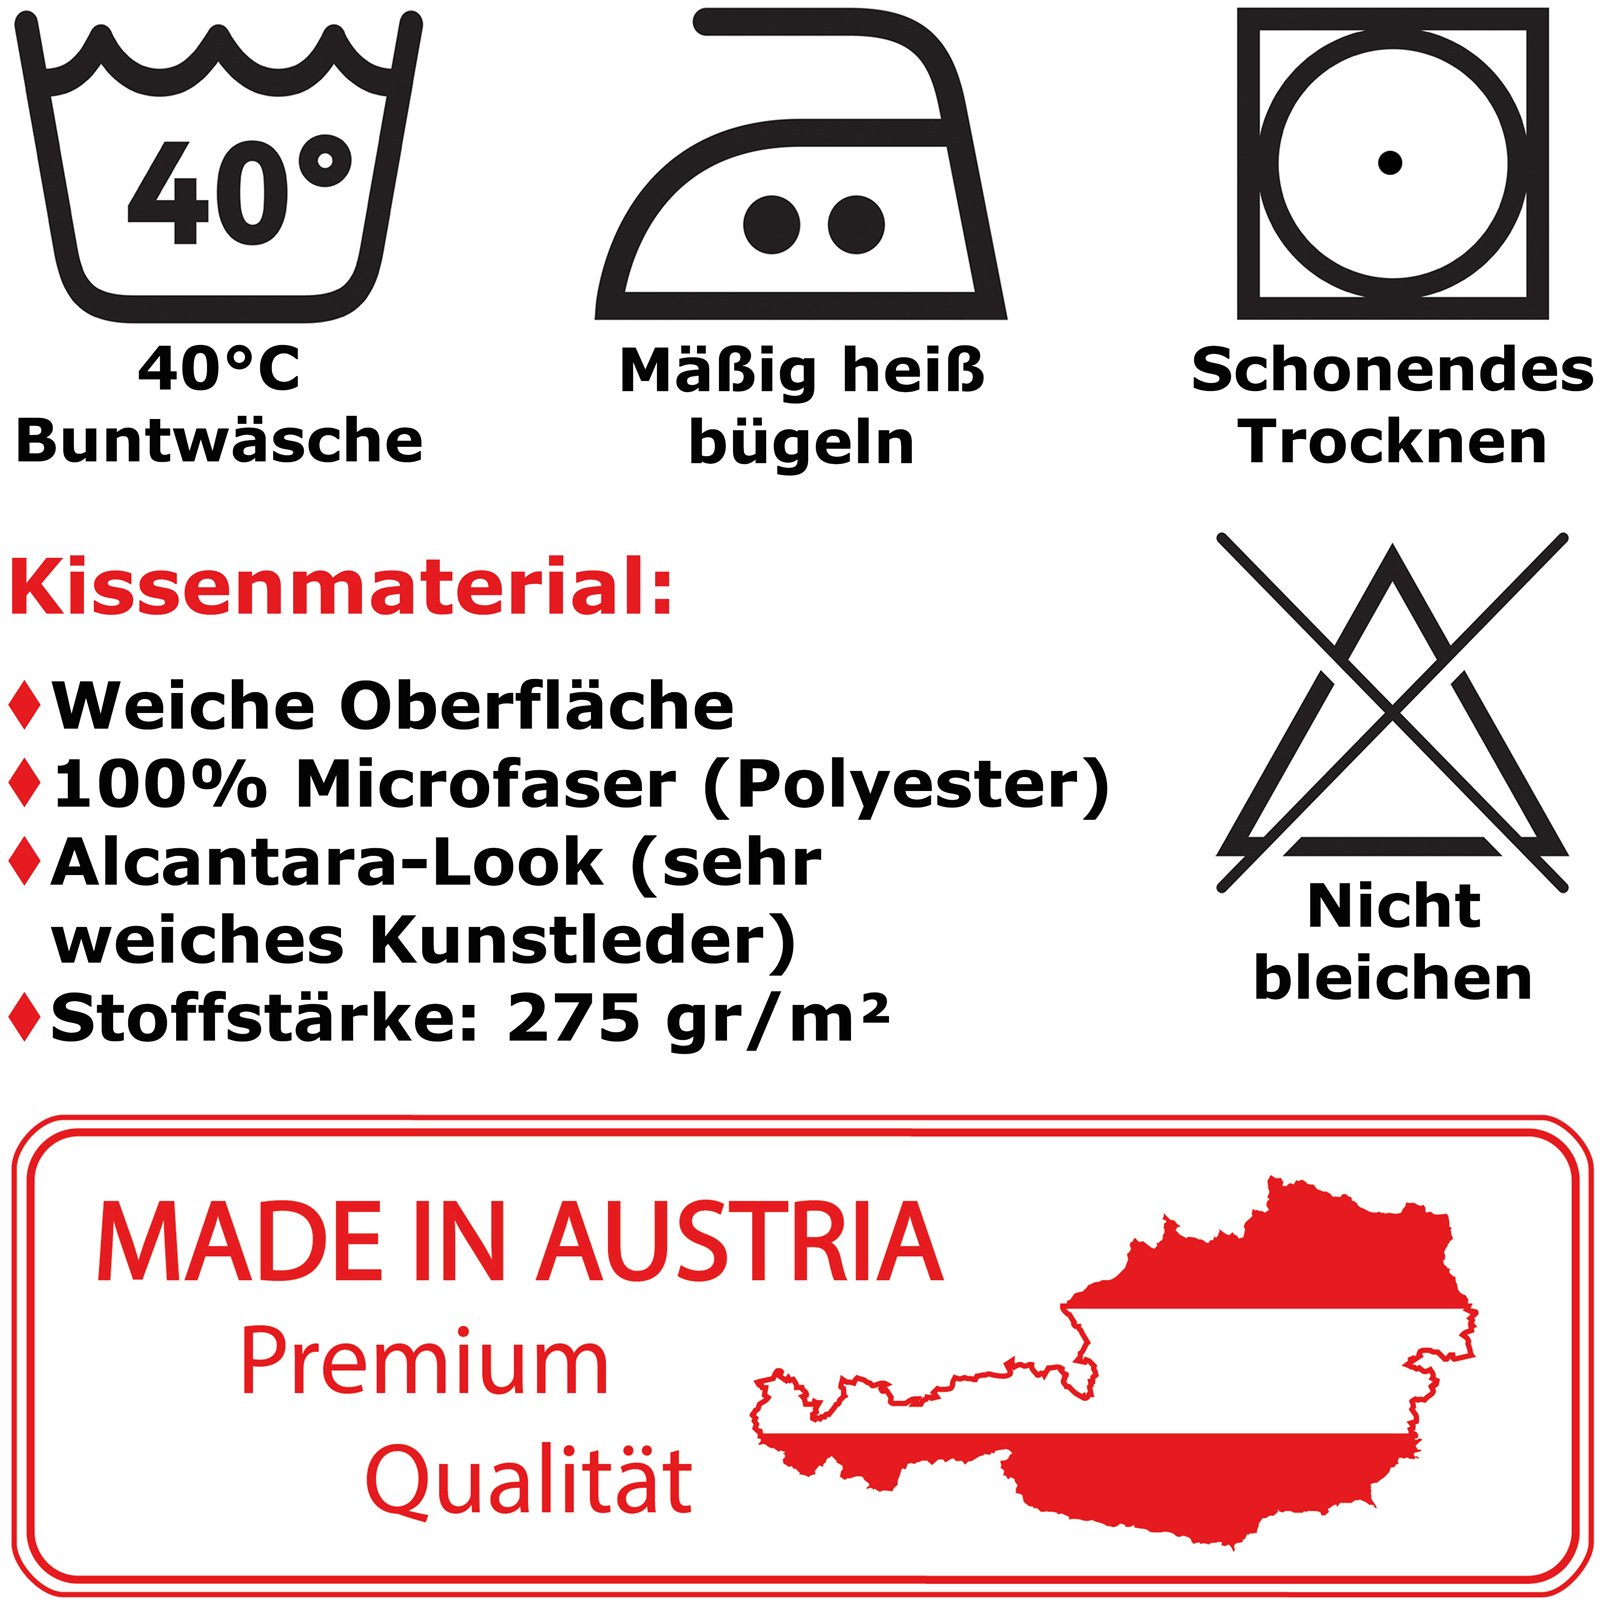 I am from Austria